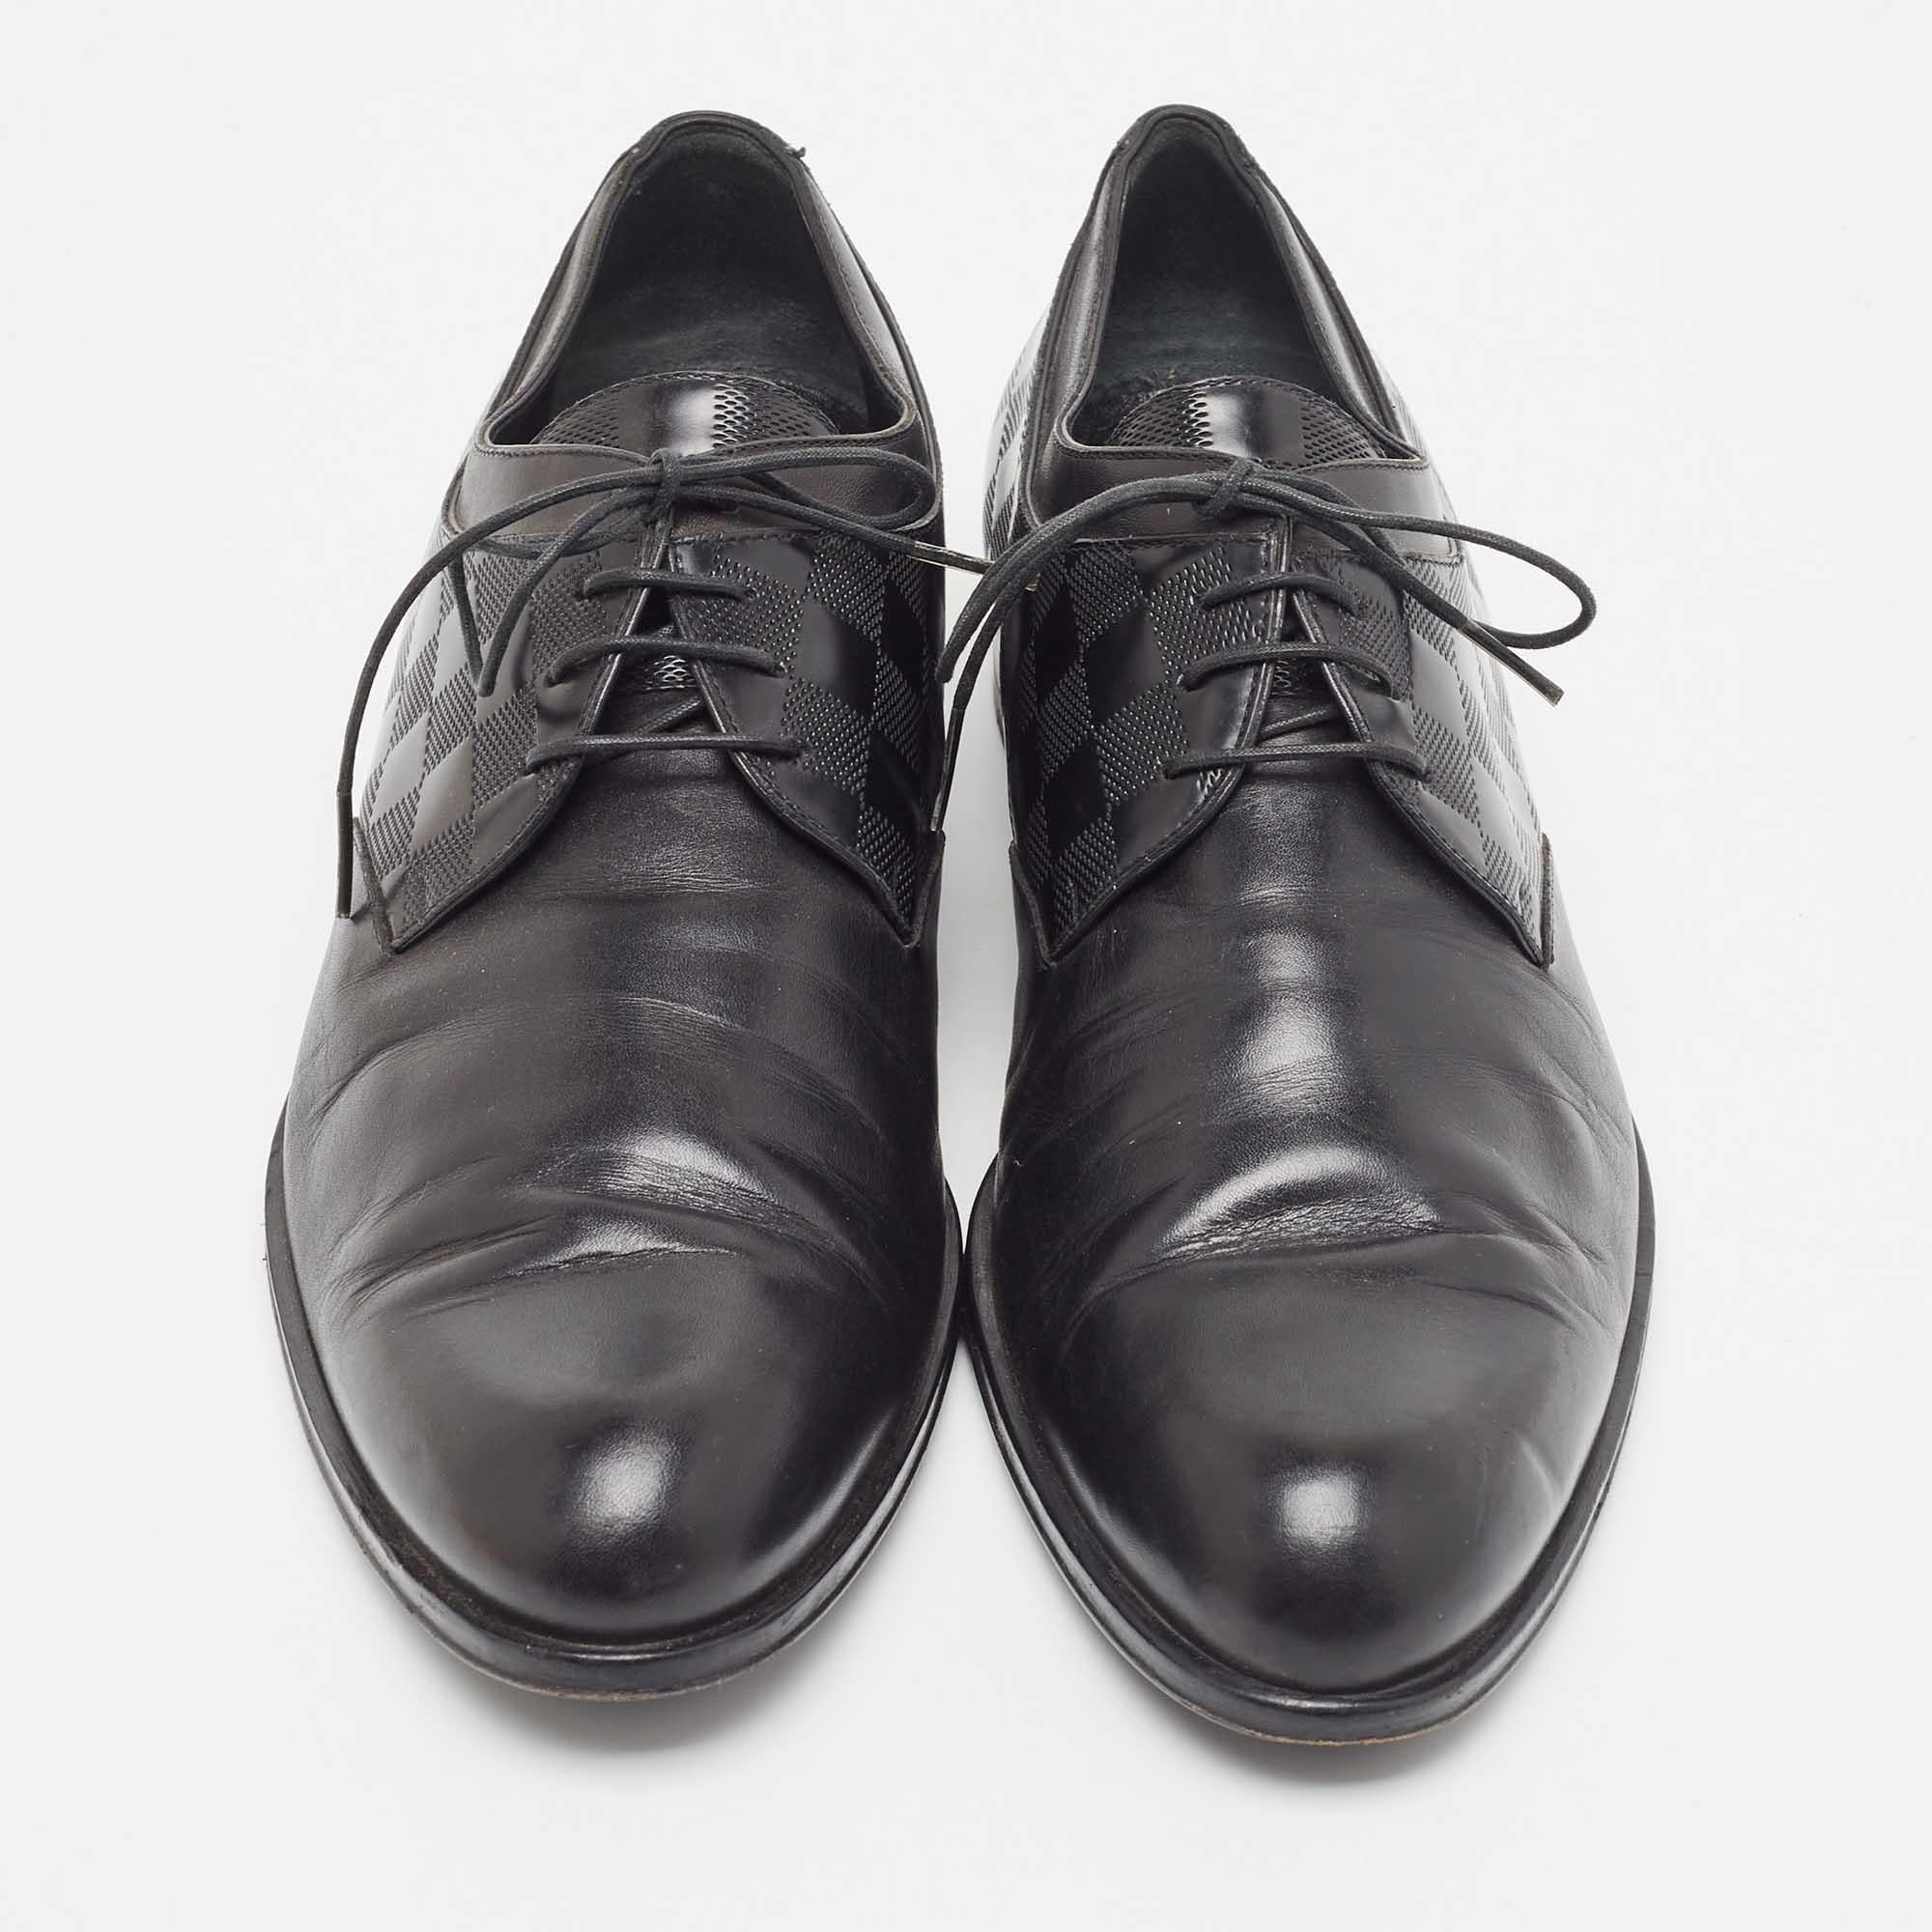 Men's Louis Vuitton Black Damier Embossed Leather Lace Up Oxford Size 43 For Sale